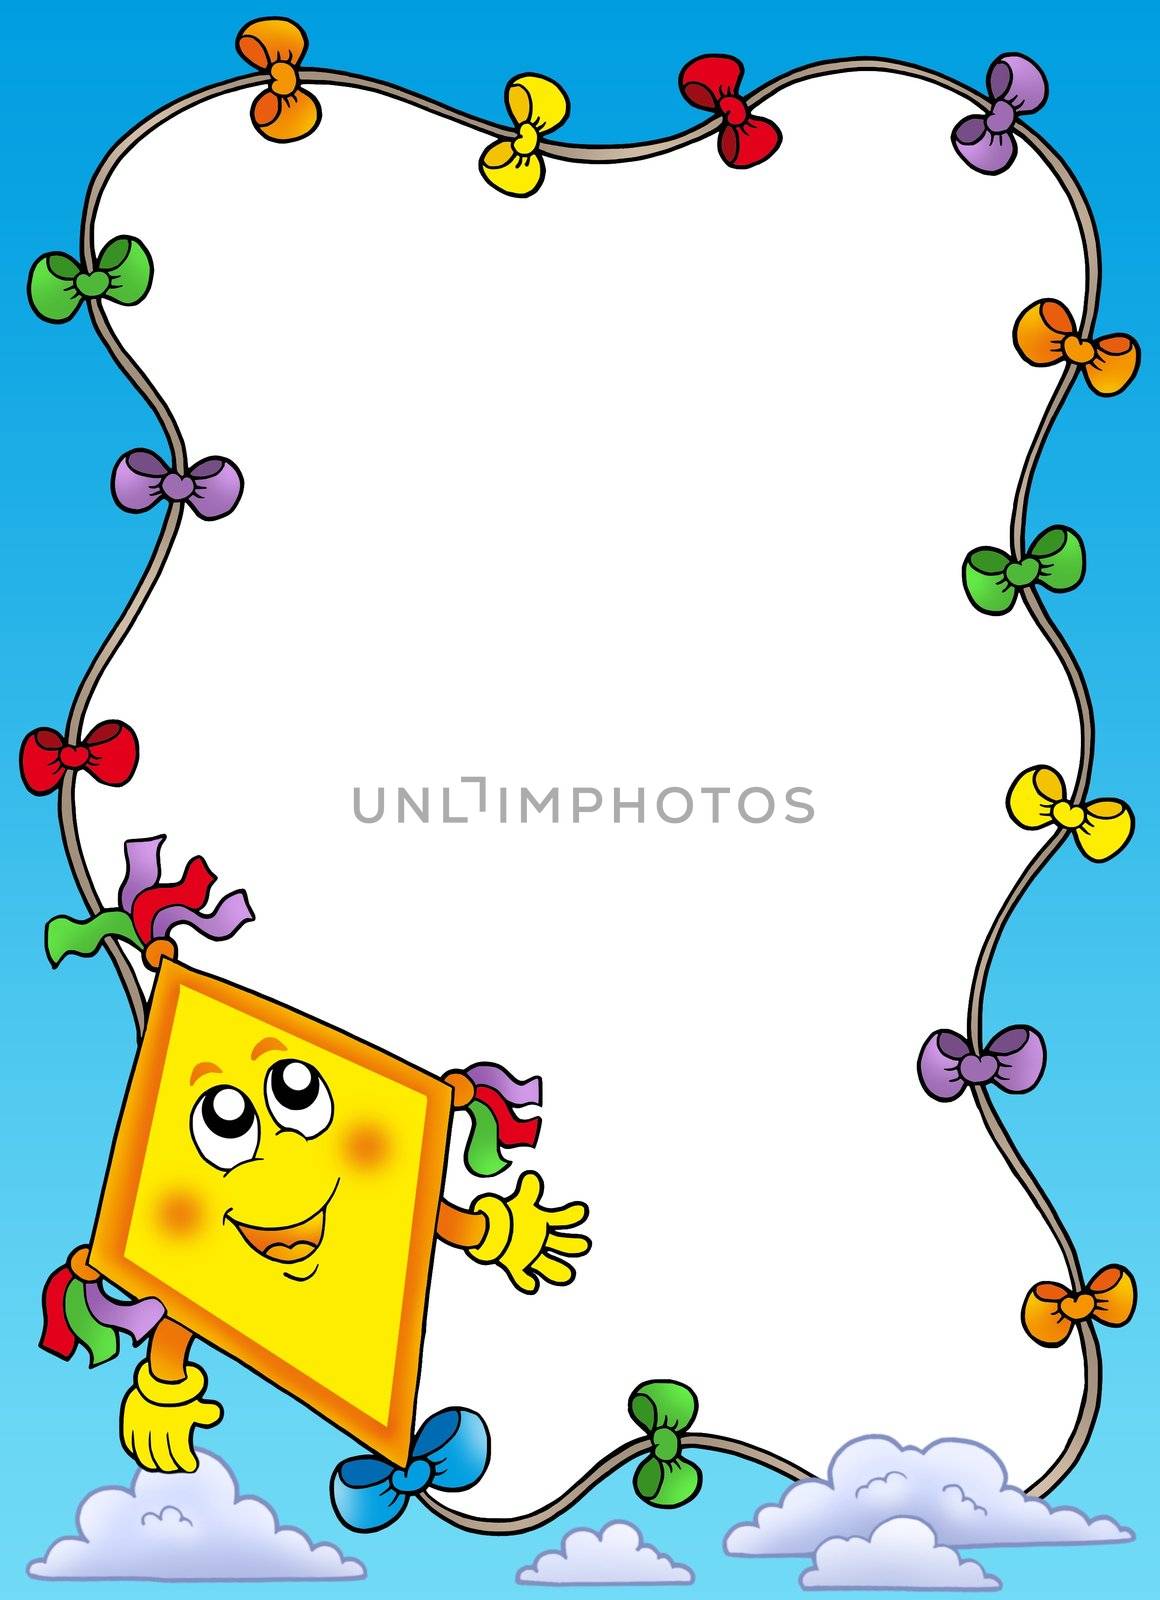 Autumn frame with flying kite - color illustration.